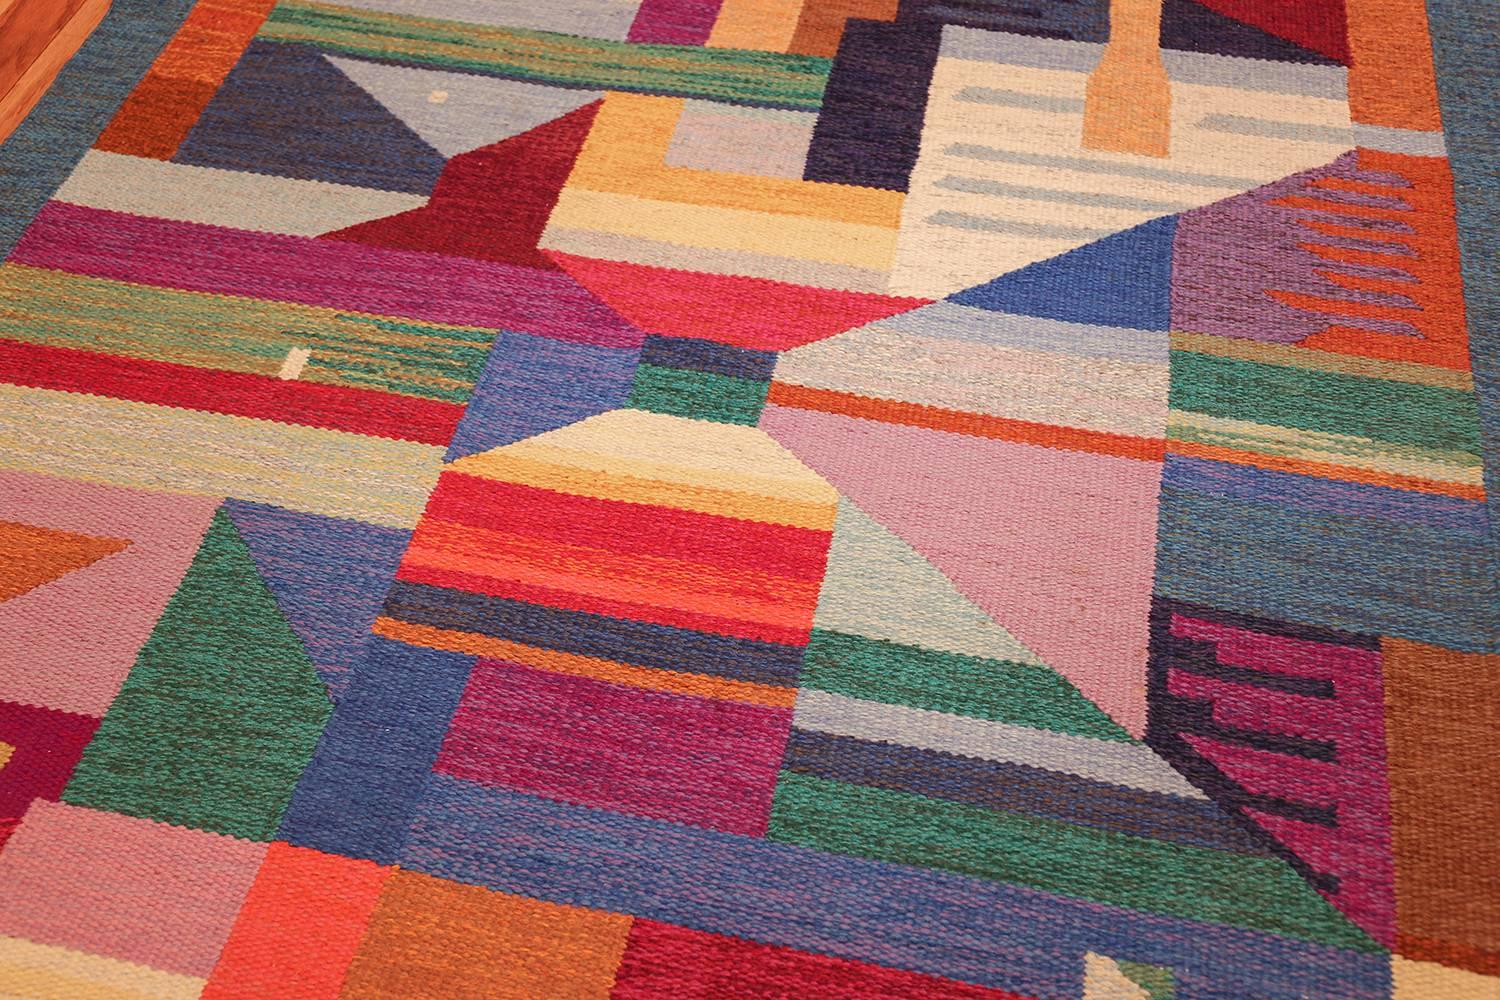 20th Century Colorful Vintage Scandinavian Kilim Rug by Agda Osterberg. Size: 5' 5